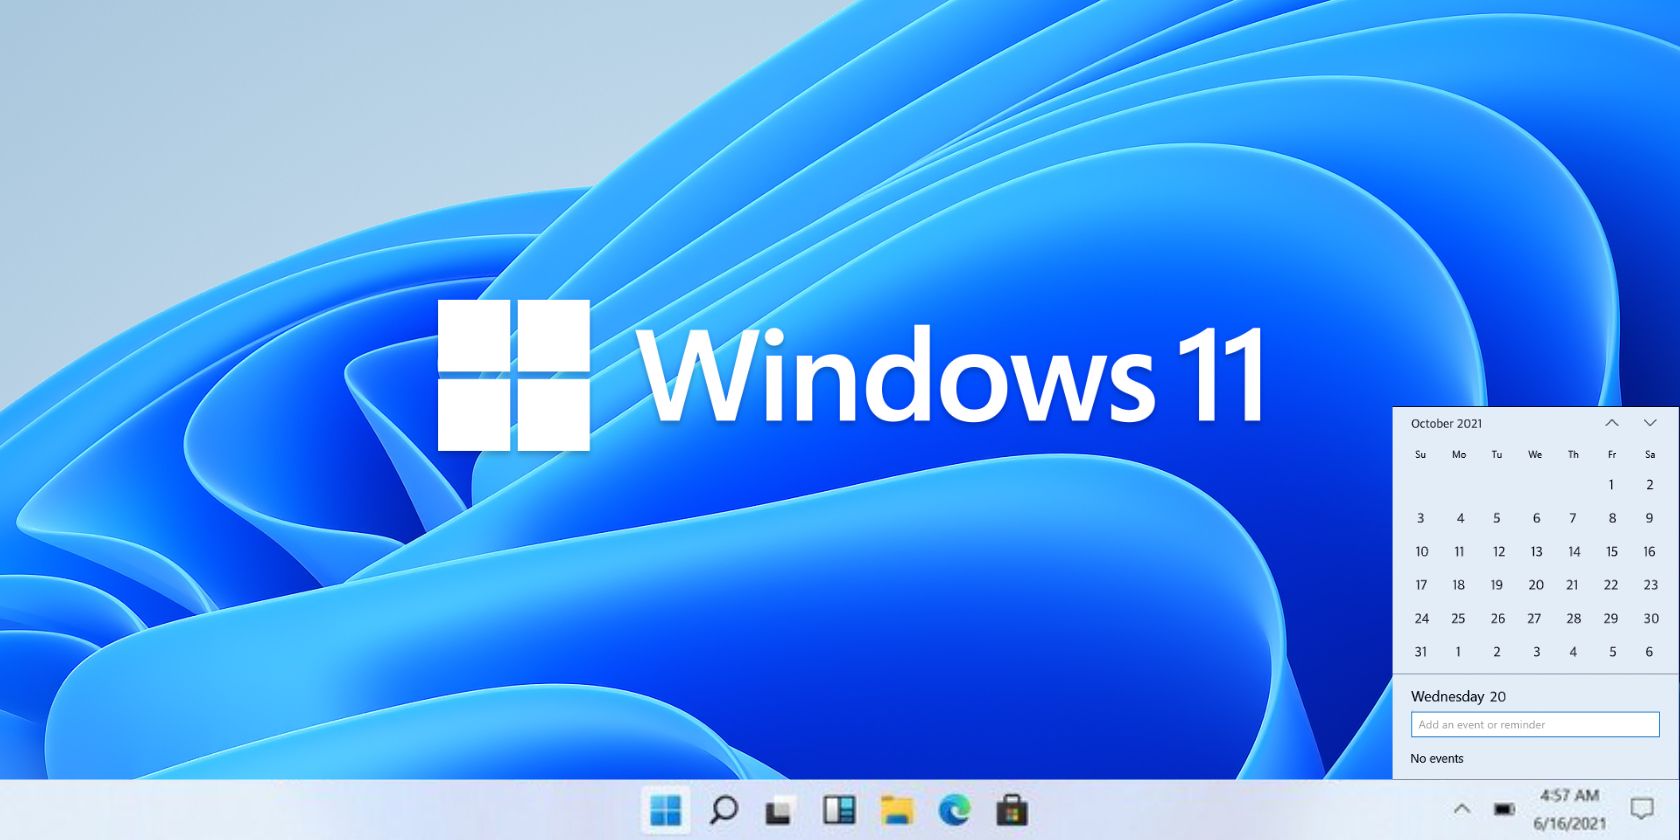 Microsoft Teases The Windows 11 Release Date